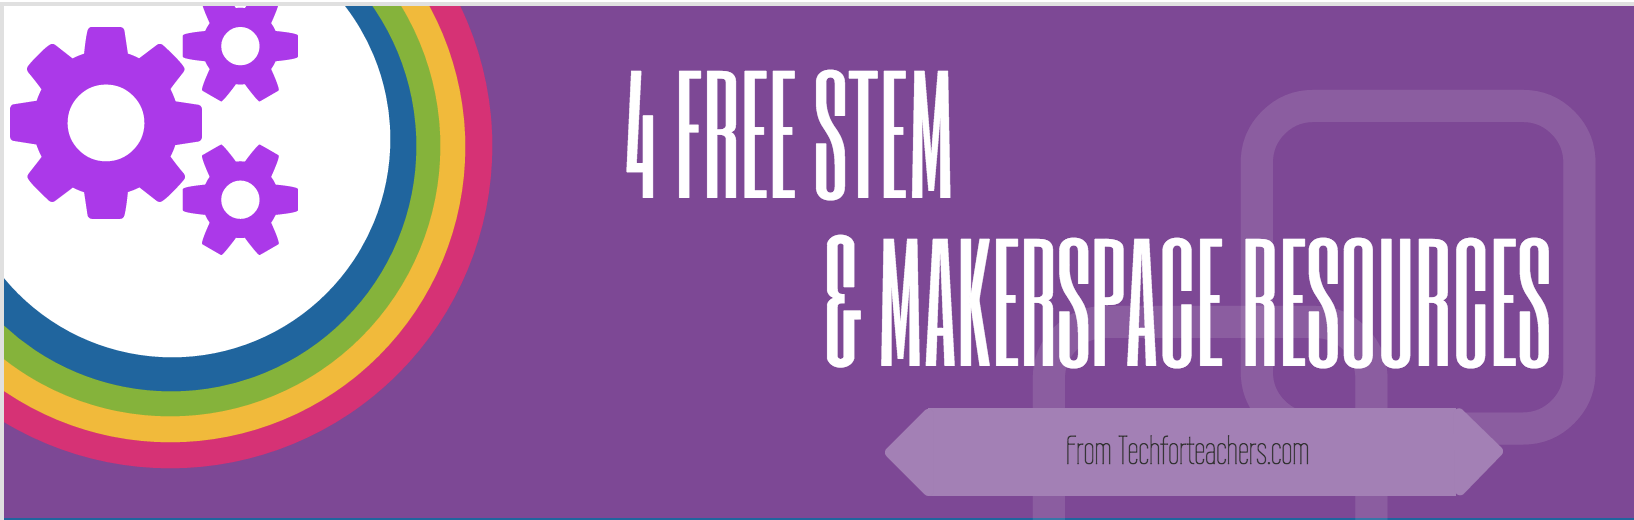 4 Free #STEM and #Makerspace Resources